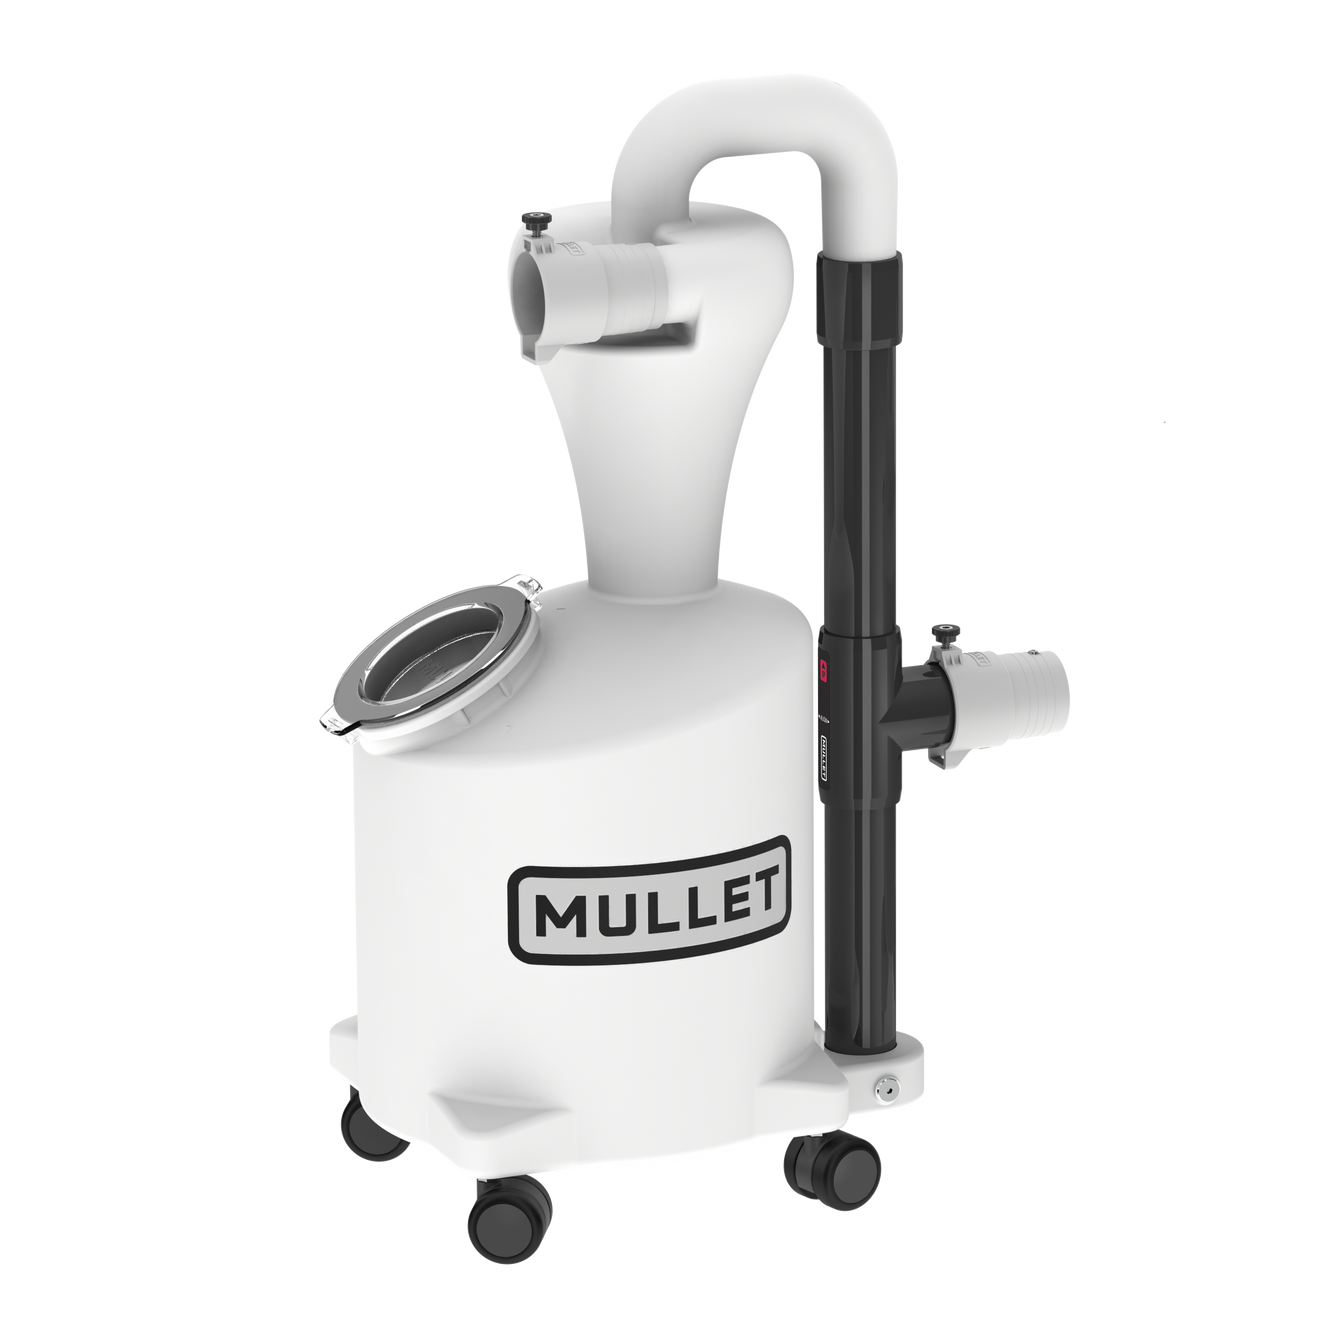 The M5 Dust Cyclone Collection from Mullet Tools in Milk Jug White and Black